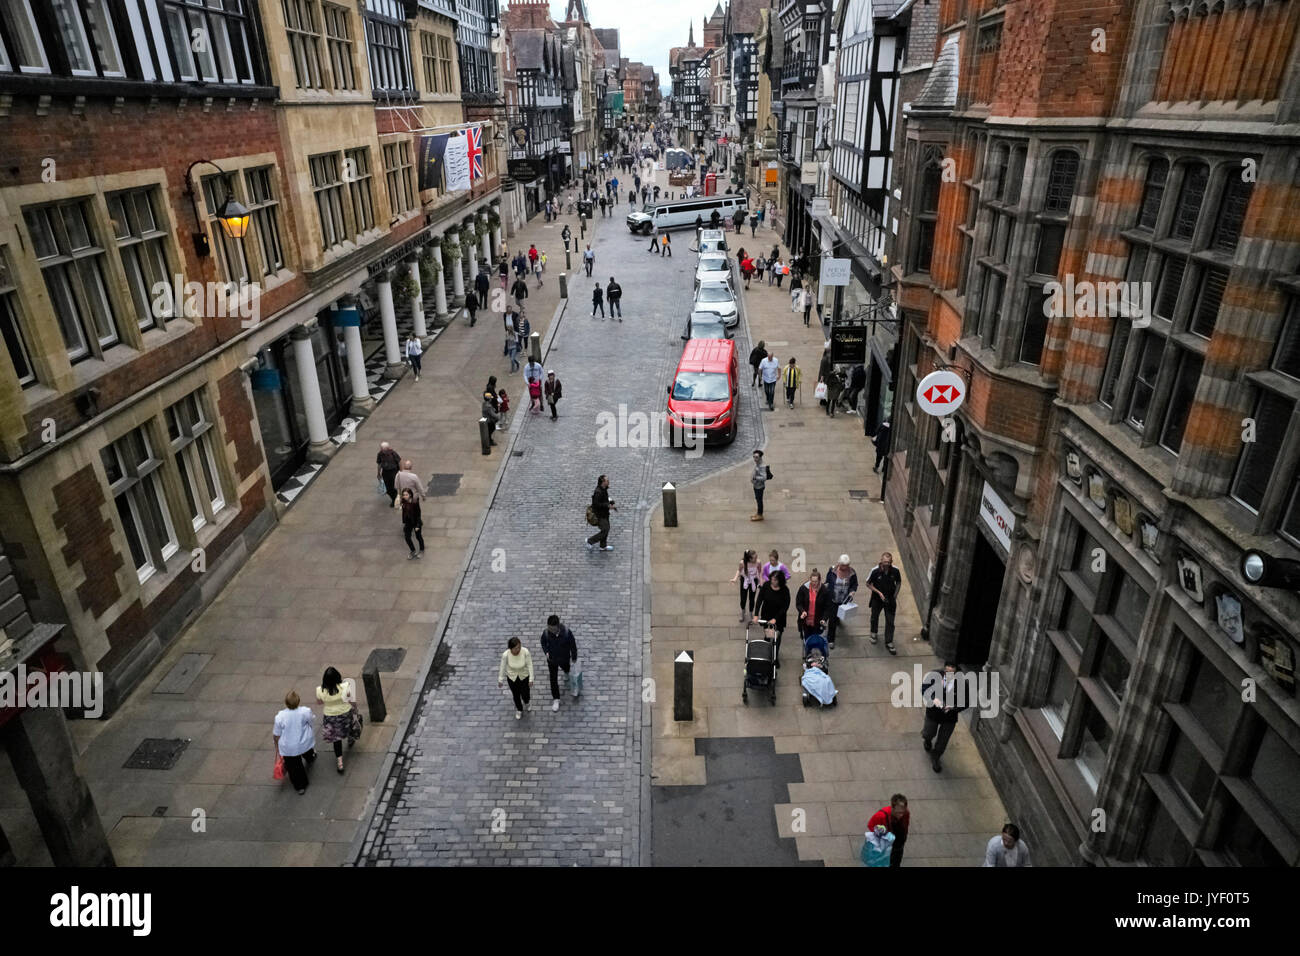 Street in Chester viewed from above Stock Photo